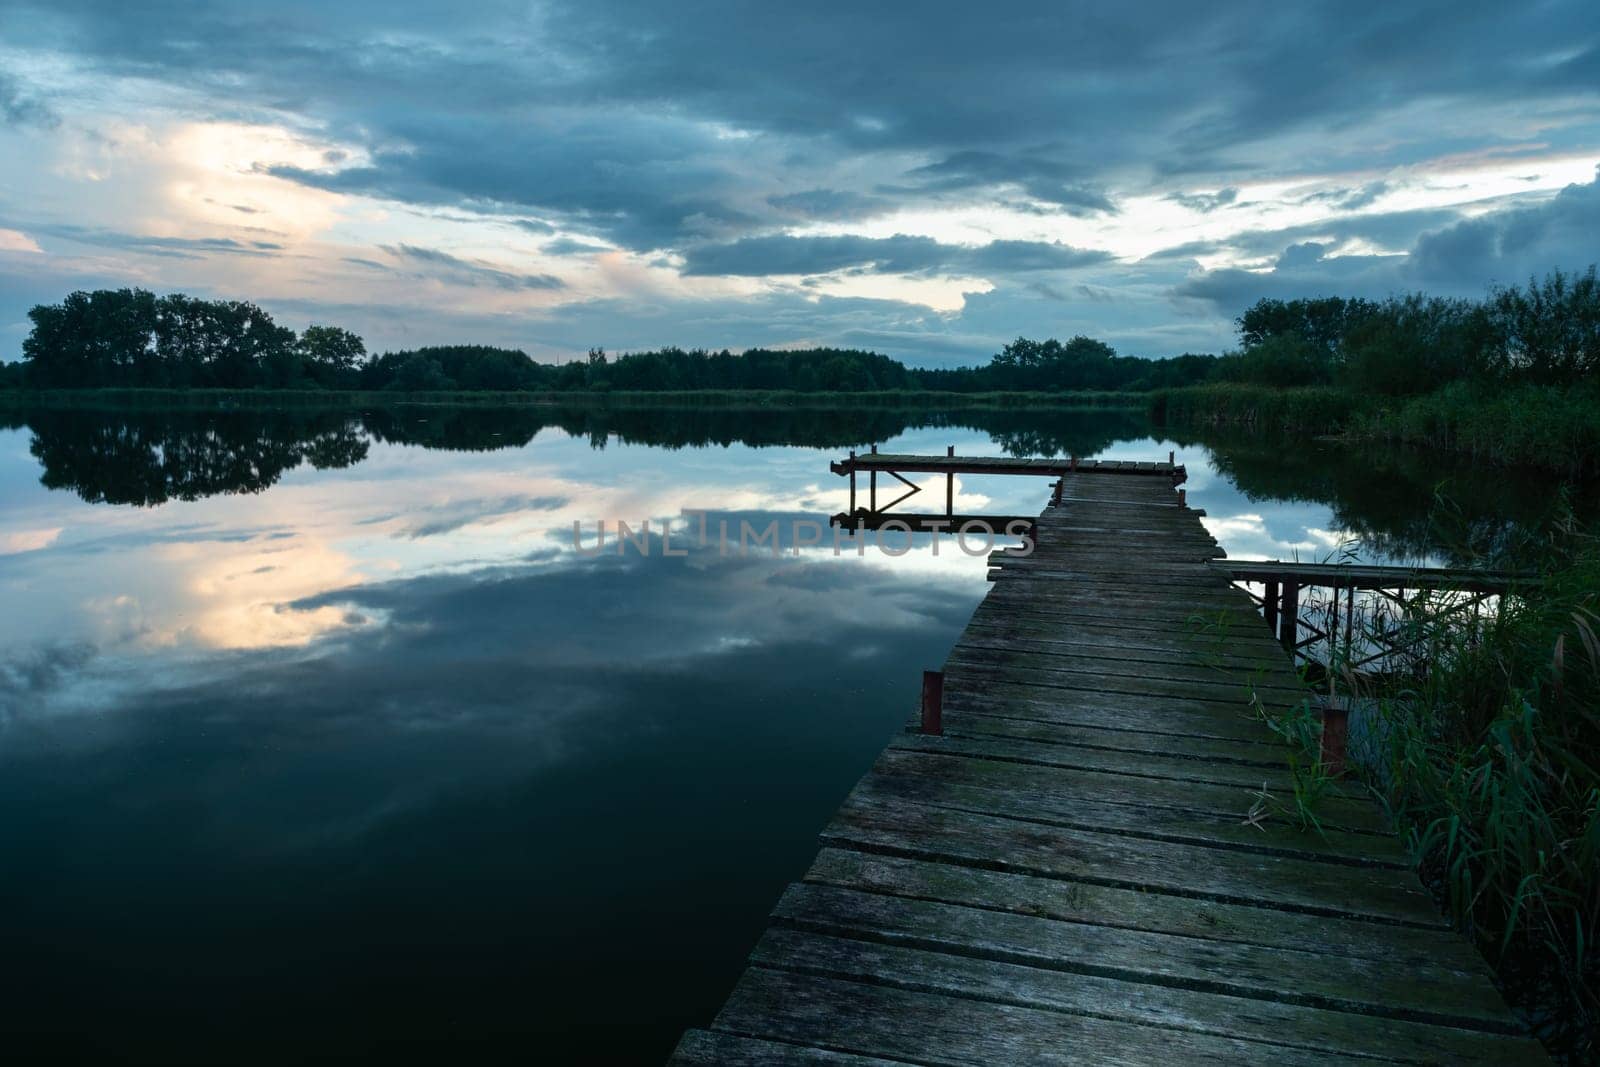 Wooden pier on a calm lake and evening clouds by darekb22